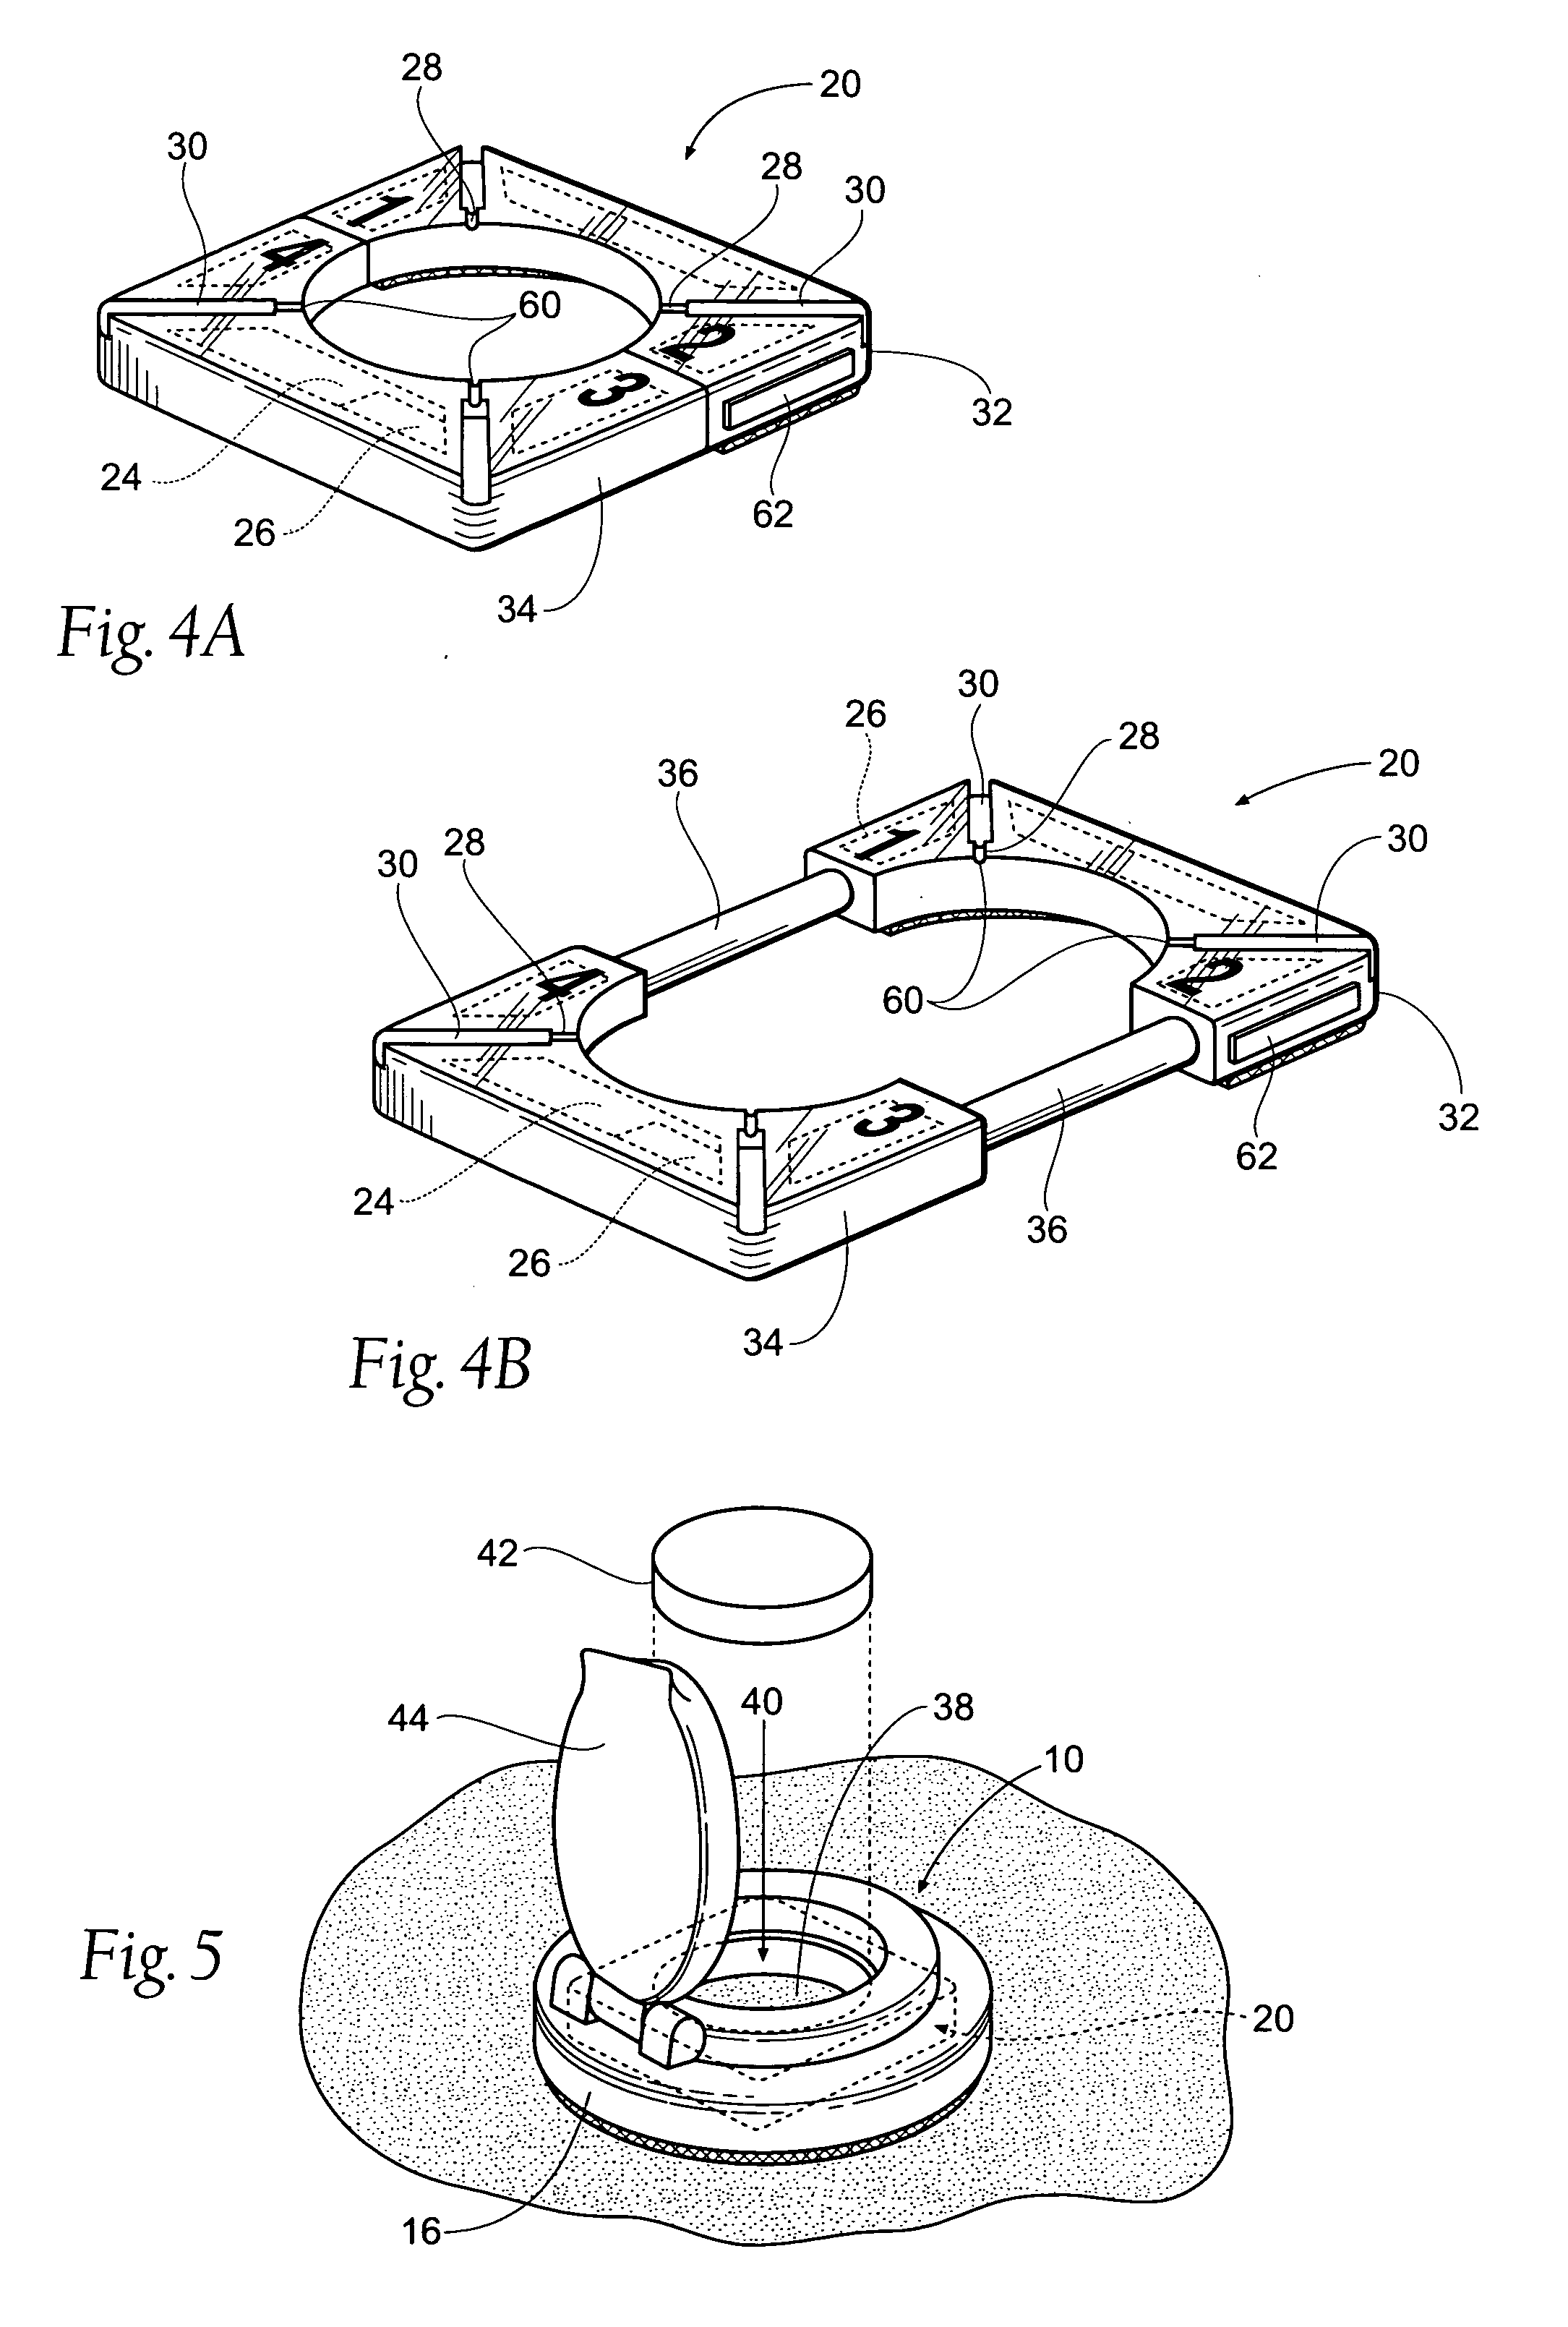 Portable assemblies, systems and methods for providing functional or therapeutic neuromuscular stimulation